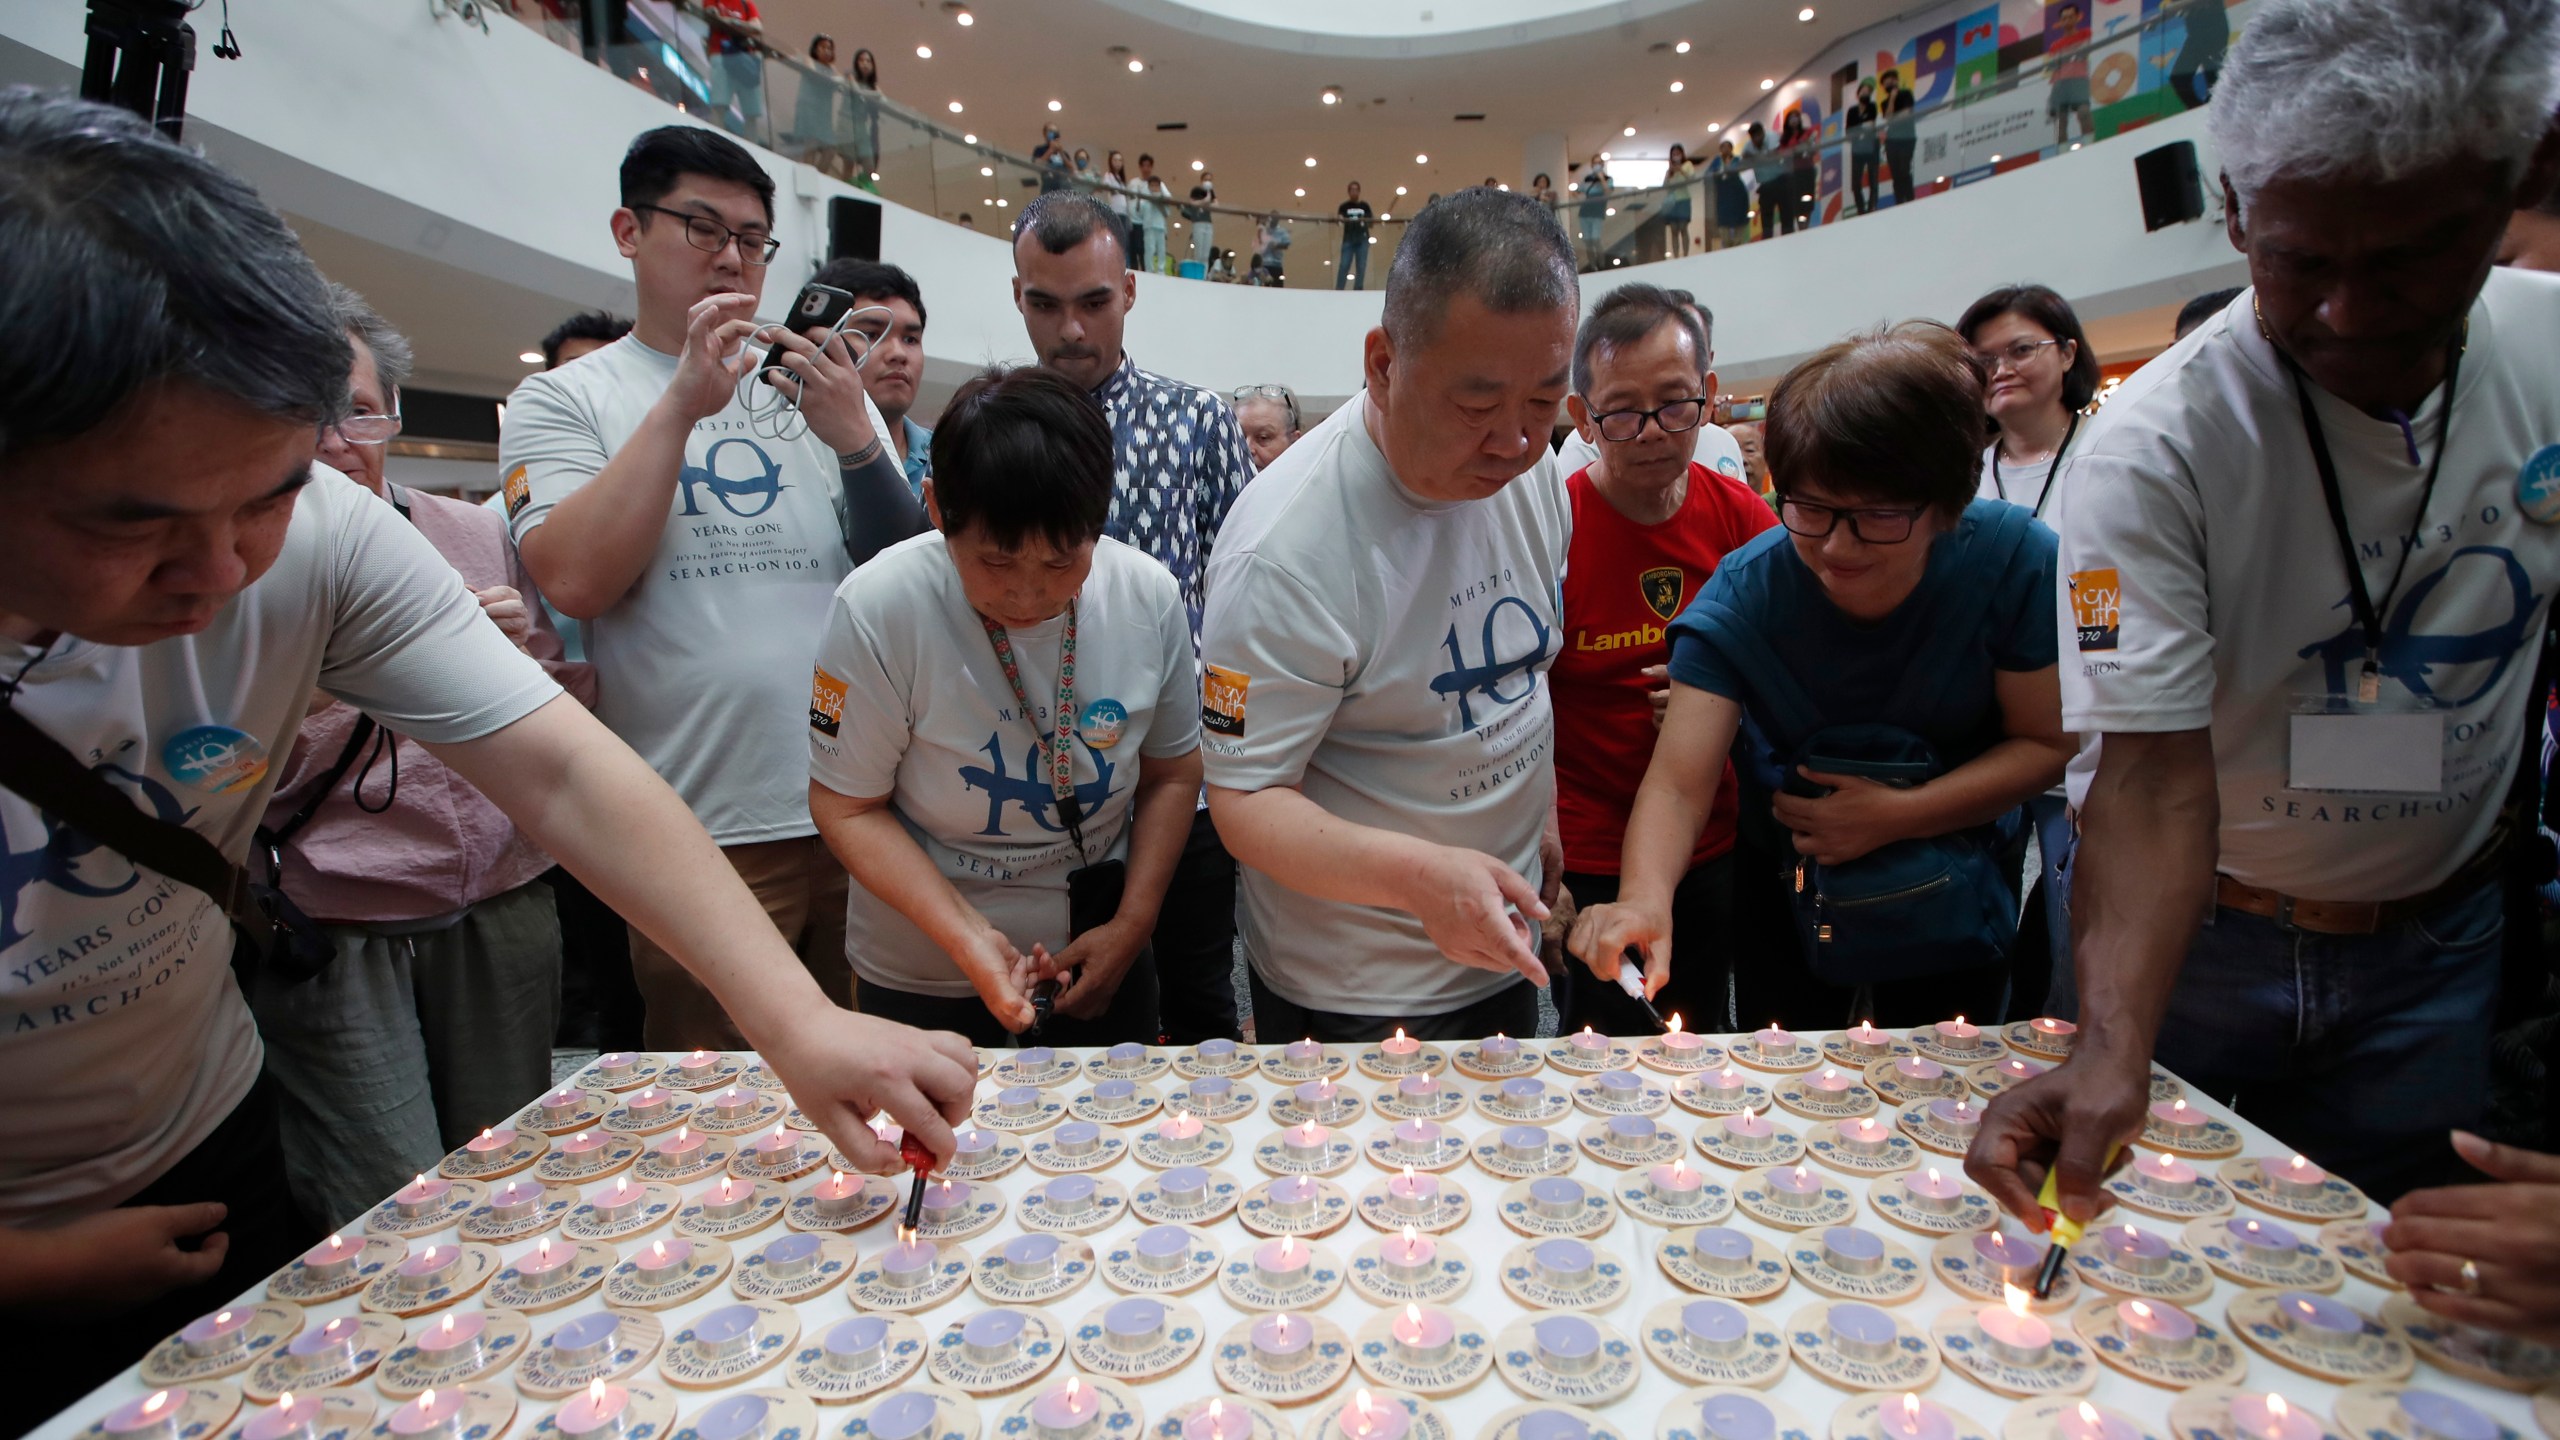 Family members and relatives of passengers on board of the missing Malaysia Airlines Flight 370 light candles during the tenth annual remembrance event at a shopping mall, in Subang Jaya, on the outskirts of Kuala Lumpur, Malaysia, Sunday, March 3, 2024. Ten years ago, a Malaysia Airlines Flight 370, had disappeared March 8, 2014 while en route from Kuala Lumpur to Beijing with over 200 people on board. (AP Photo/FL Wong)